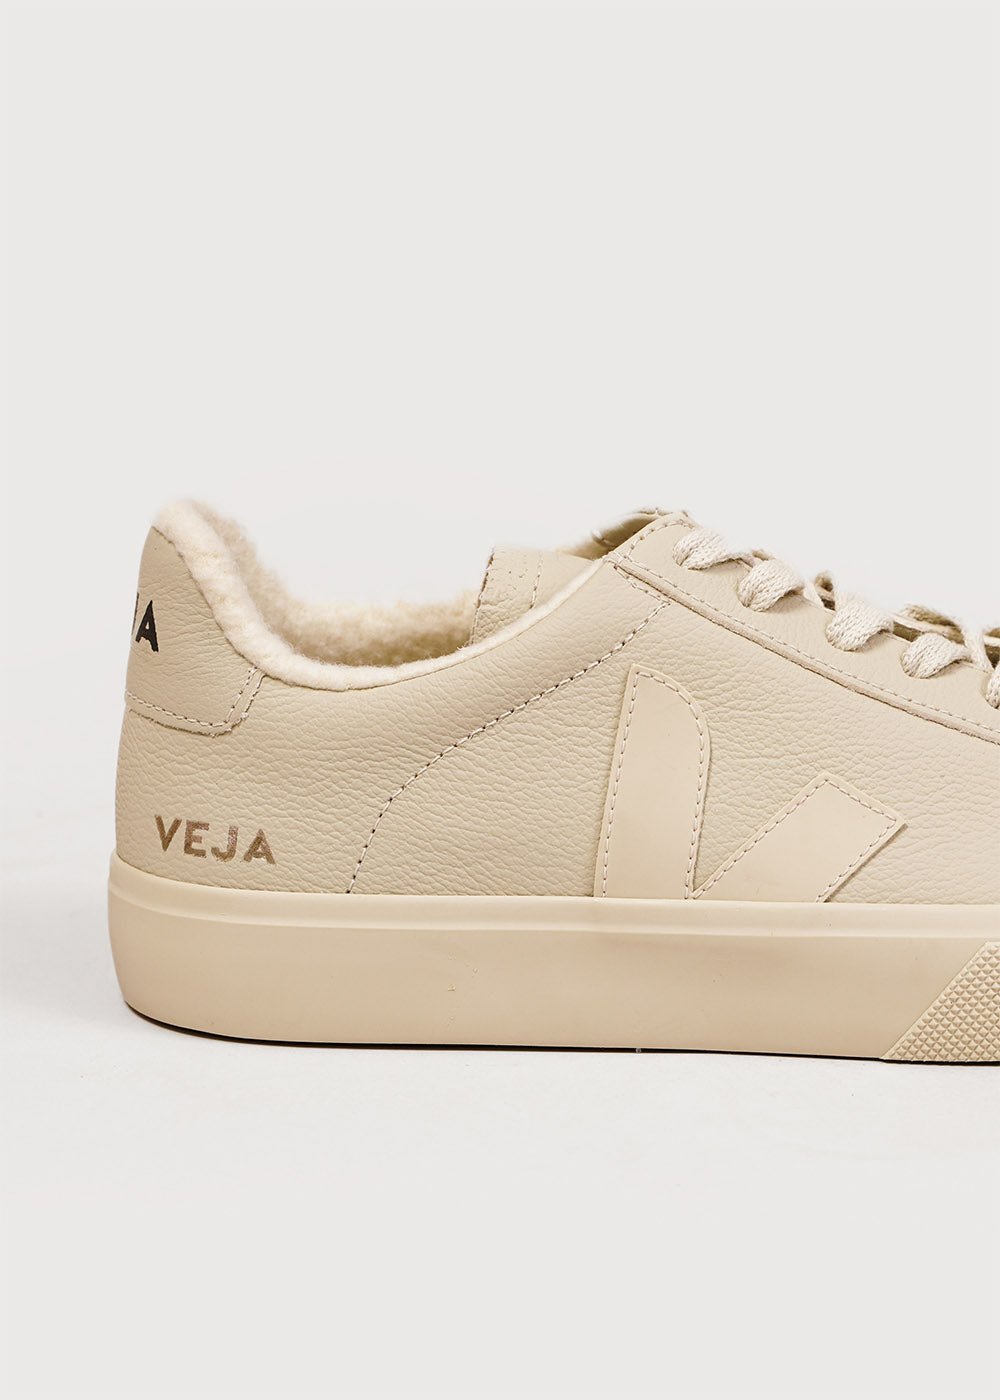 Veja Full Winter Campo Sneakers - New Classics Studios Sustainable Ethical Fashion Canada